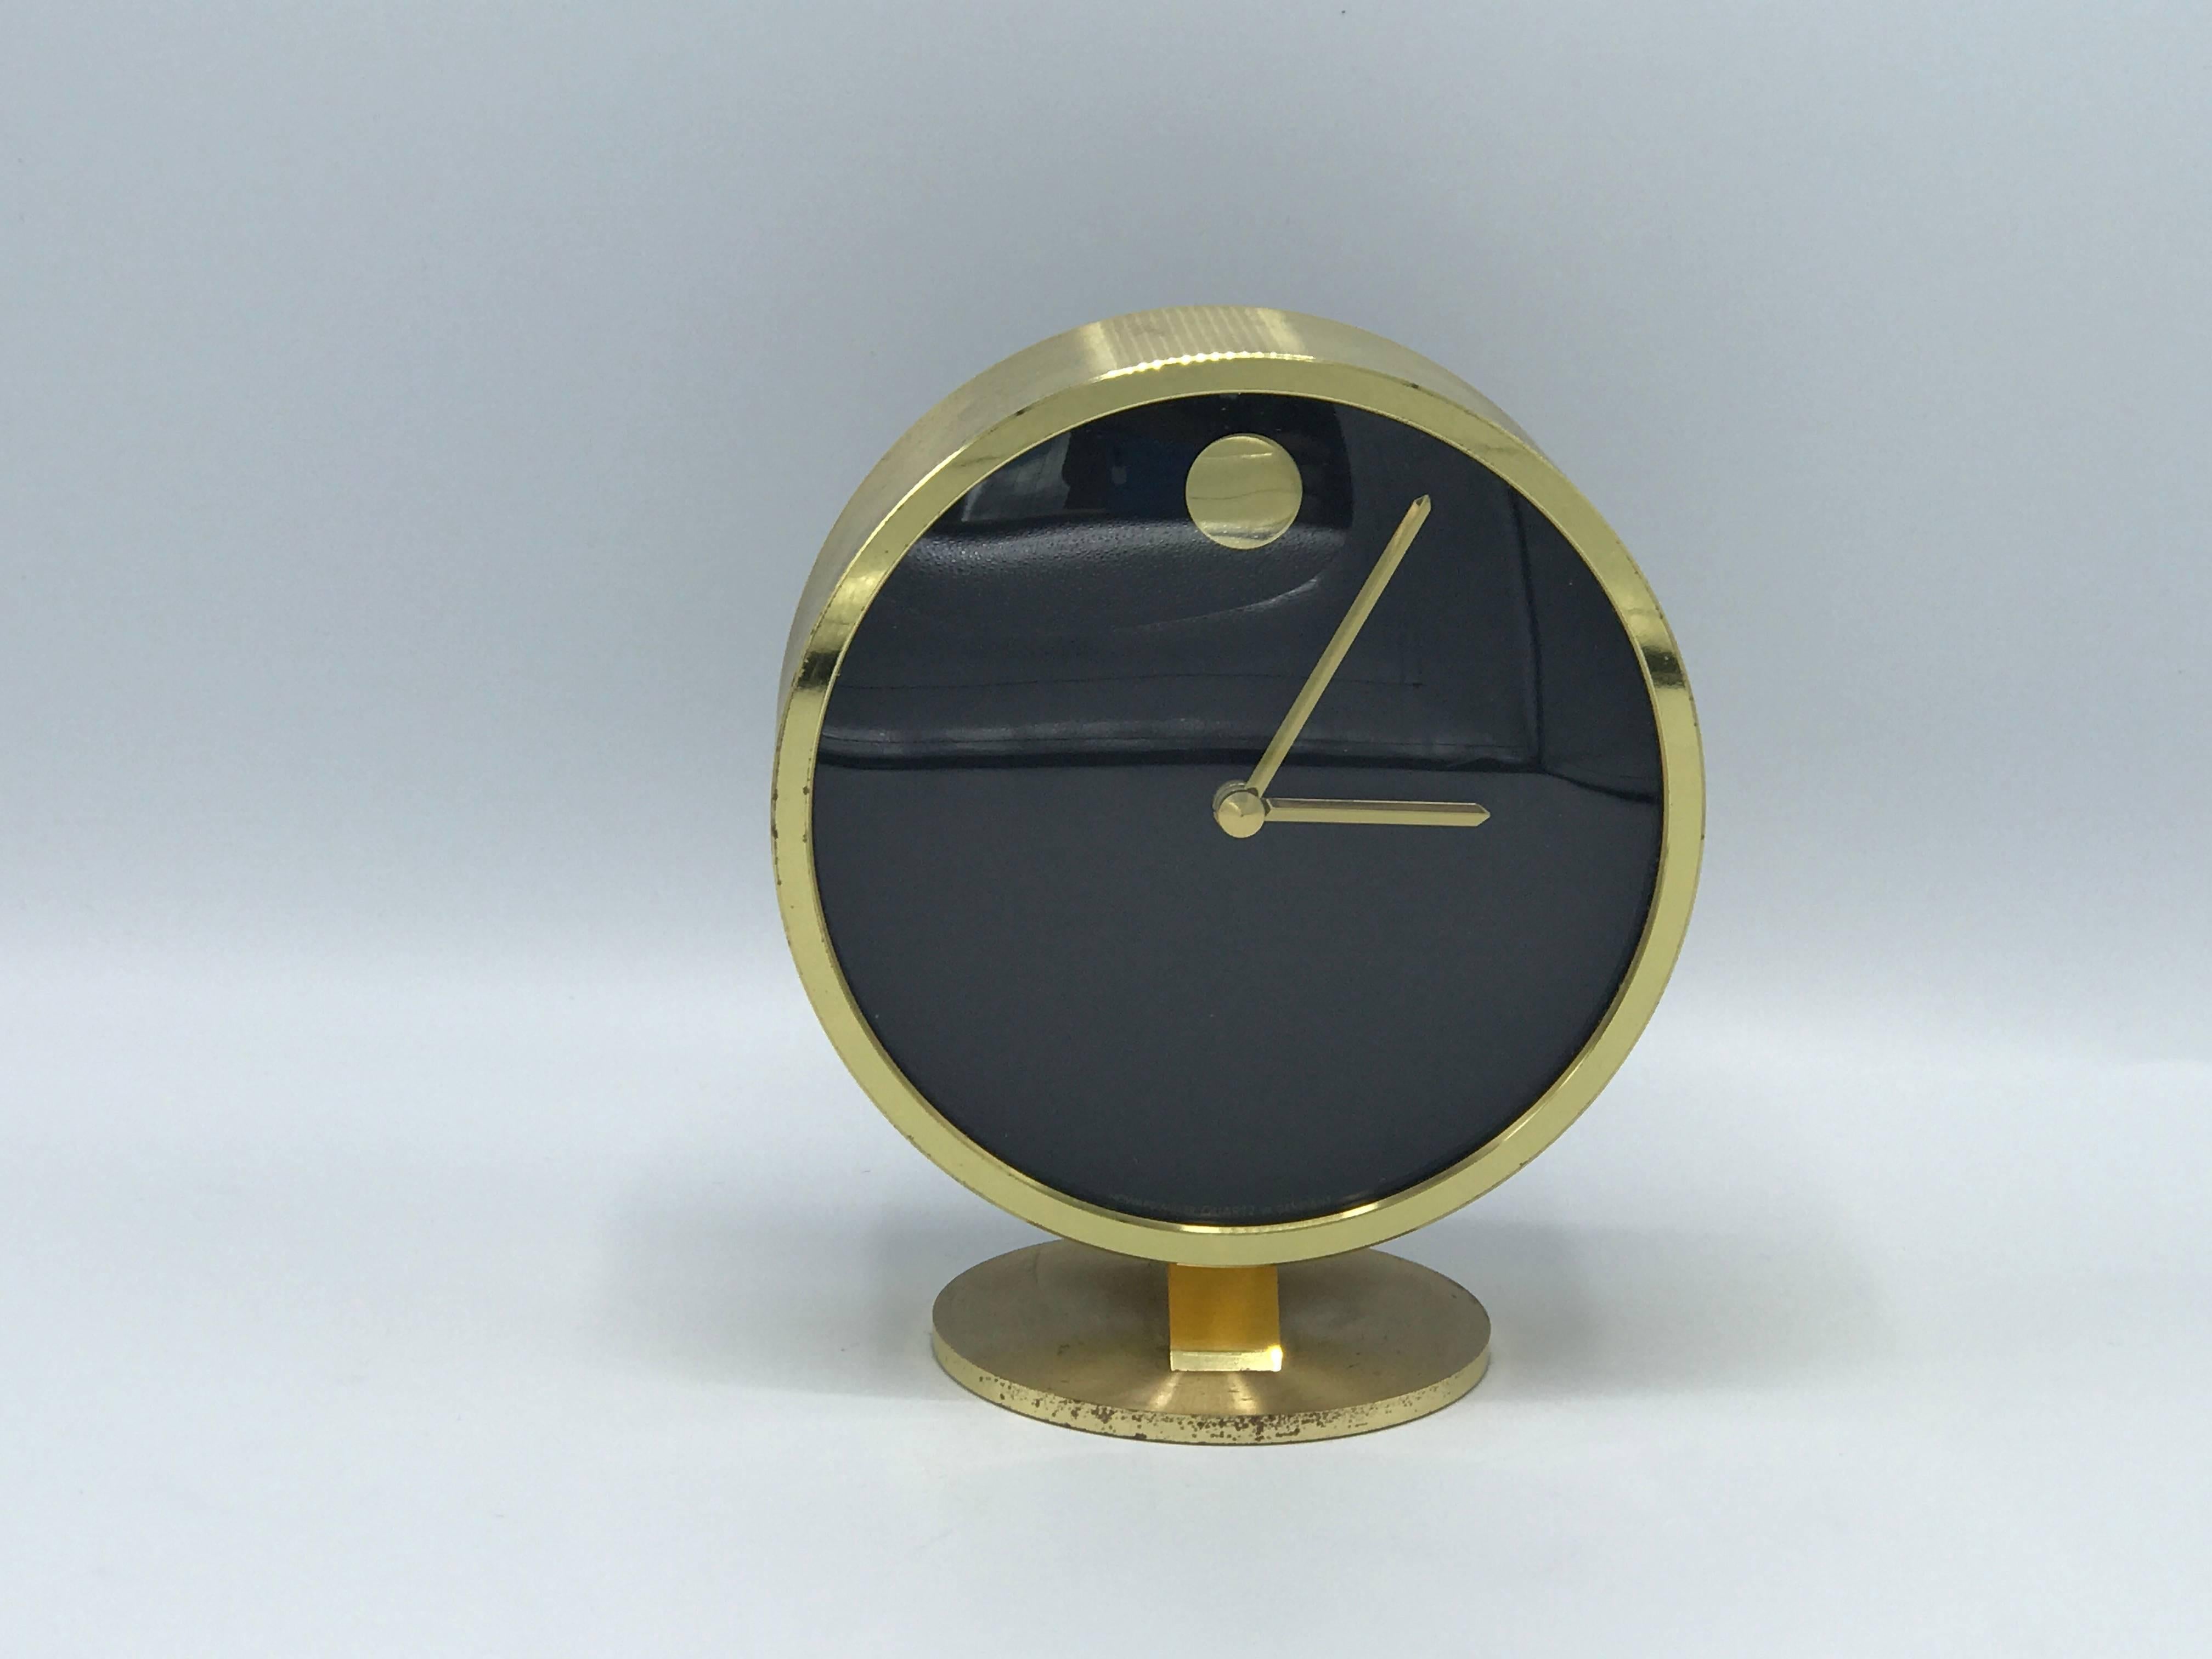 Offered is a stunning and sophisticated, 1950s battery-operated desk clock. Made in Germany.